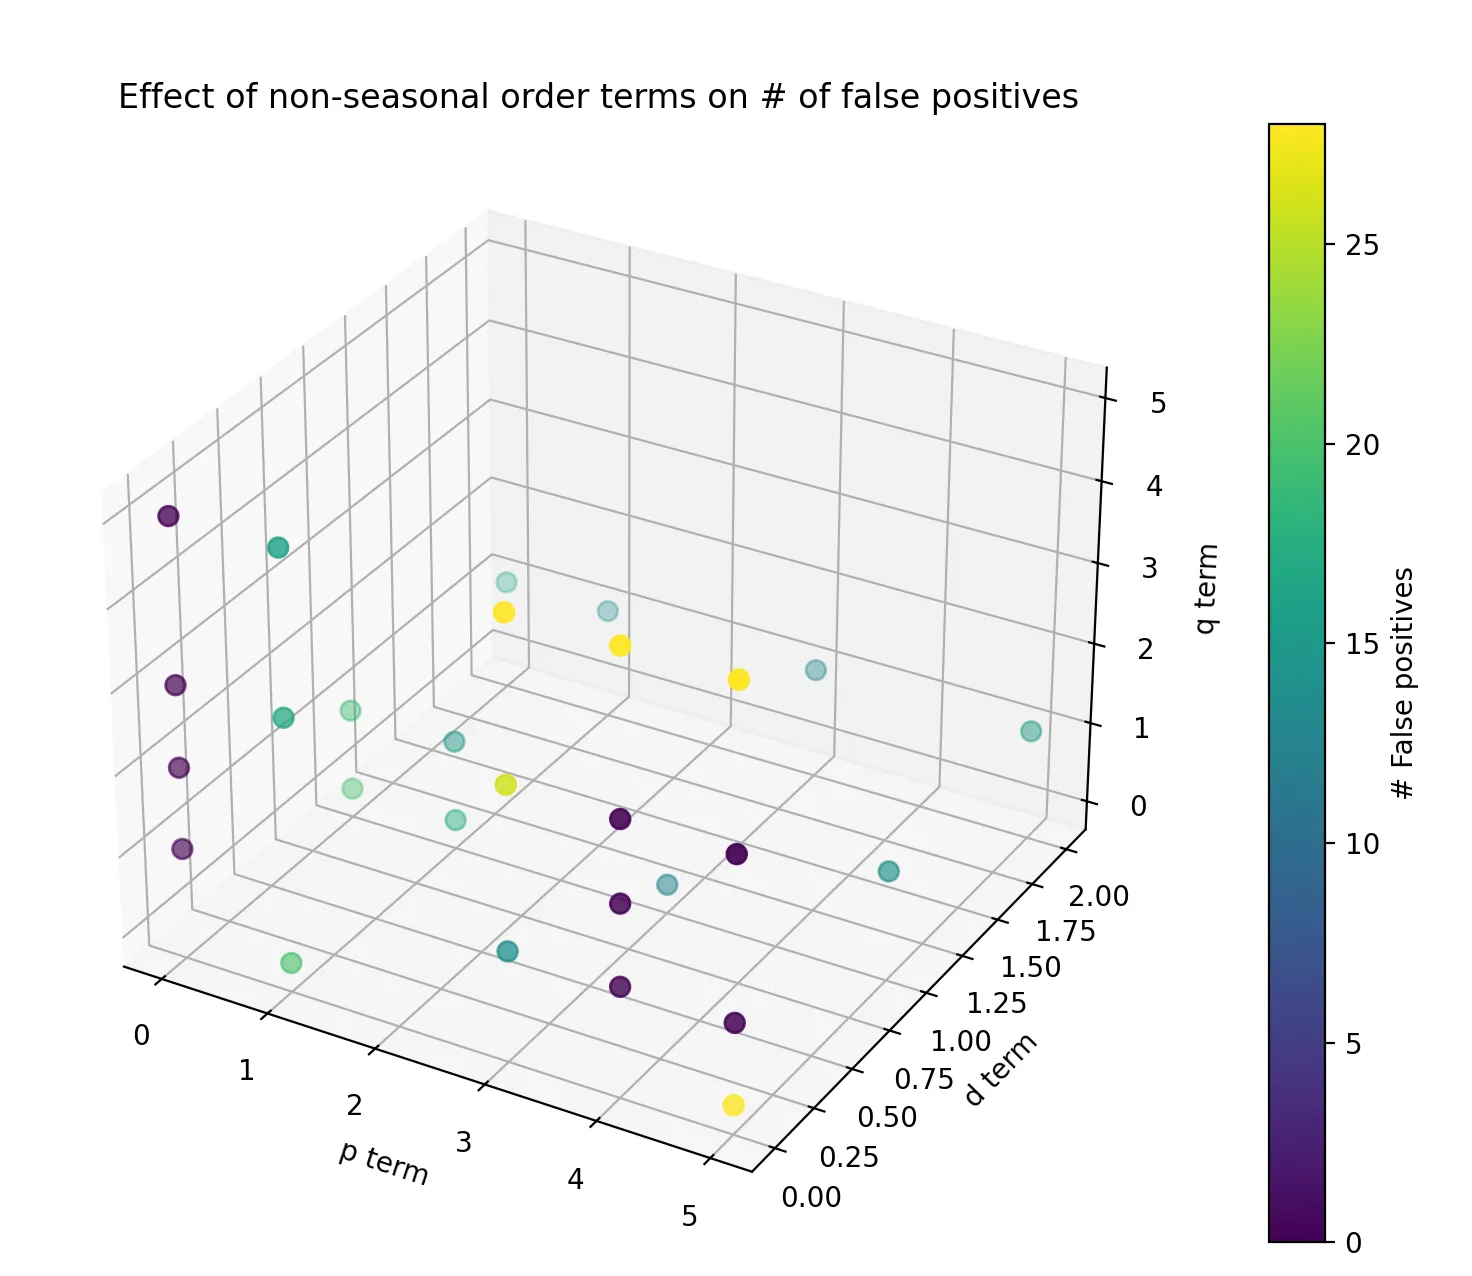 Effect of non-seasonal order terms on number of false positives